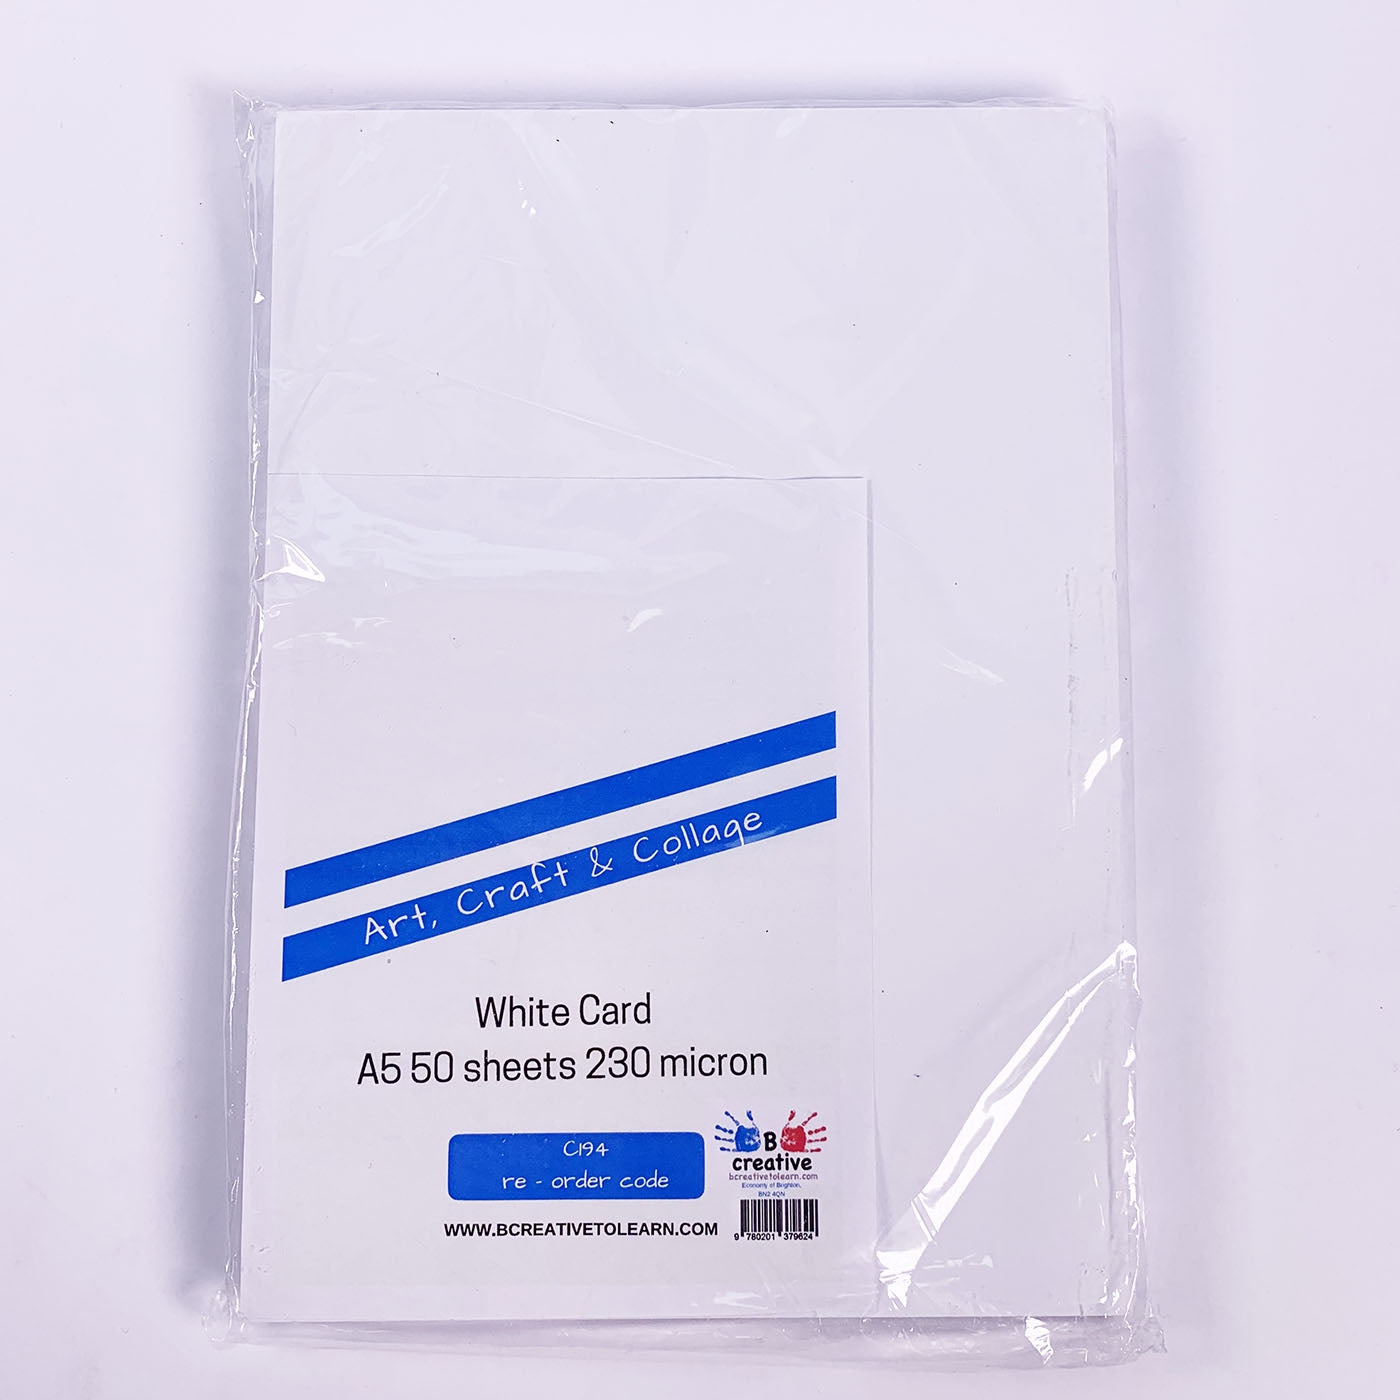 A5 white card packet